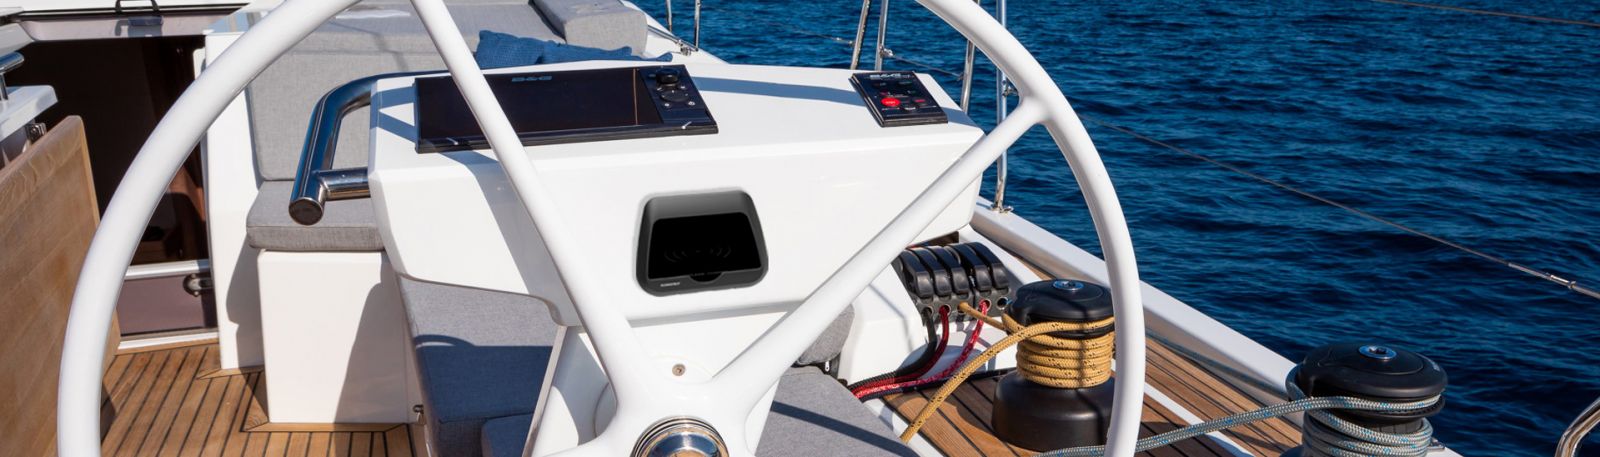 Scanstrut Features Twice in the Top 50 Boat Gadgets of 2021 by MBY, News